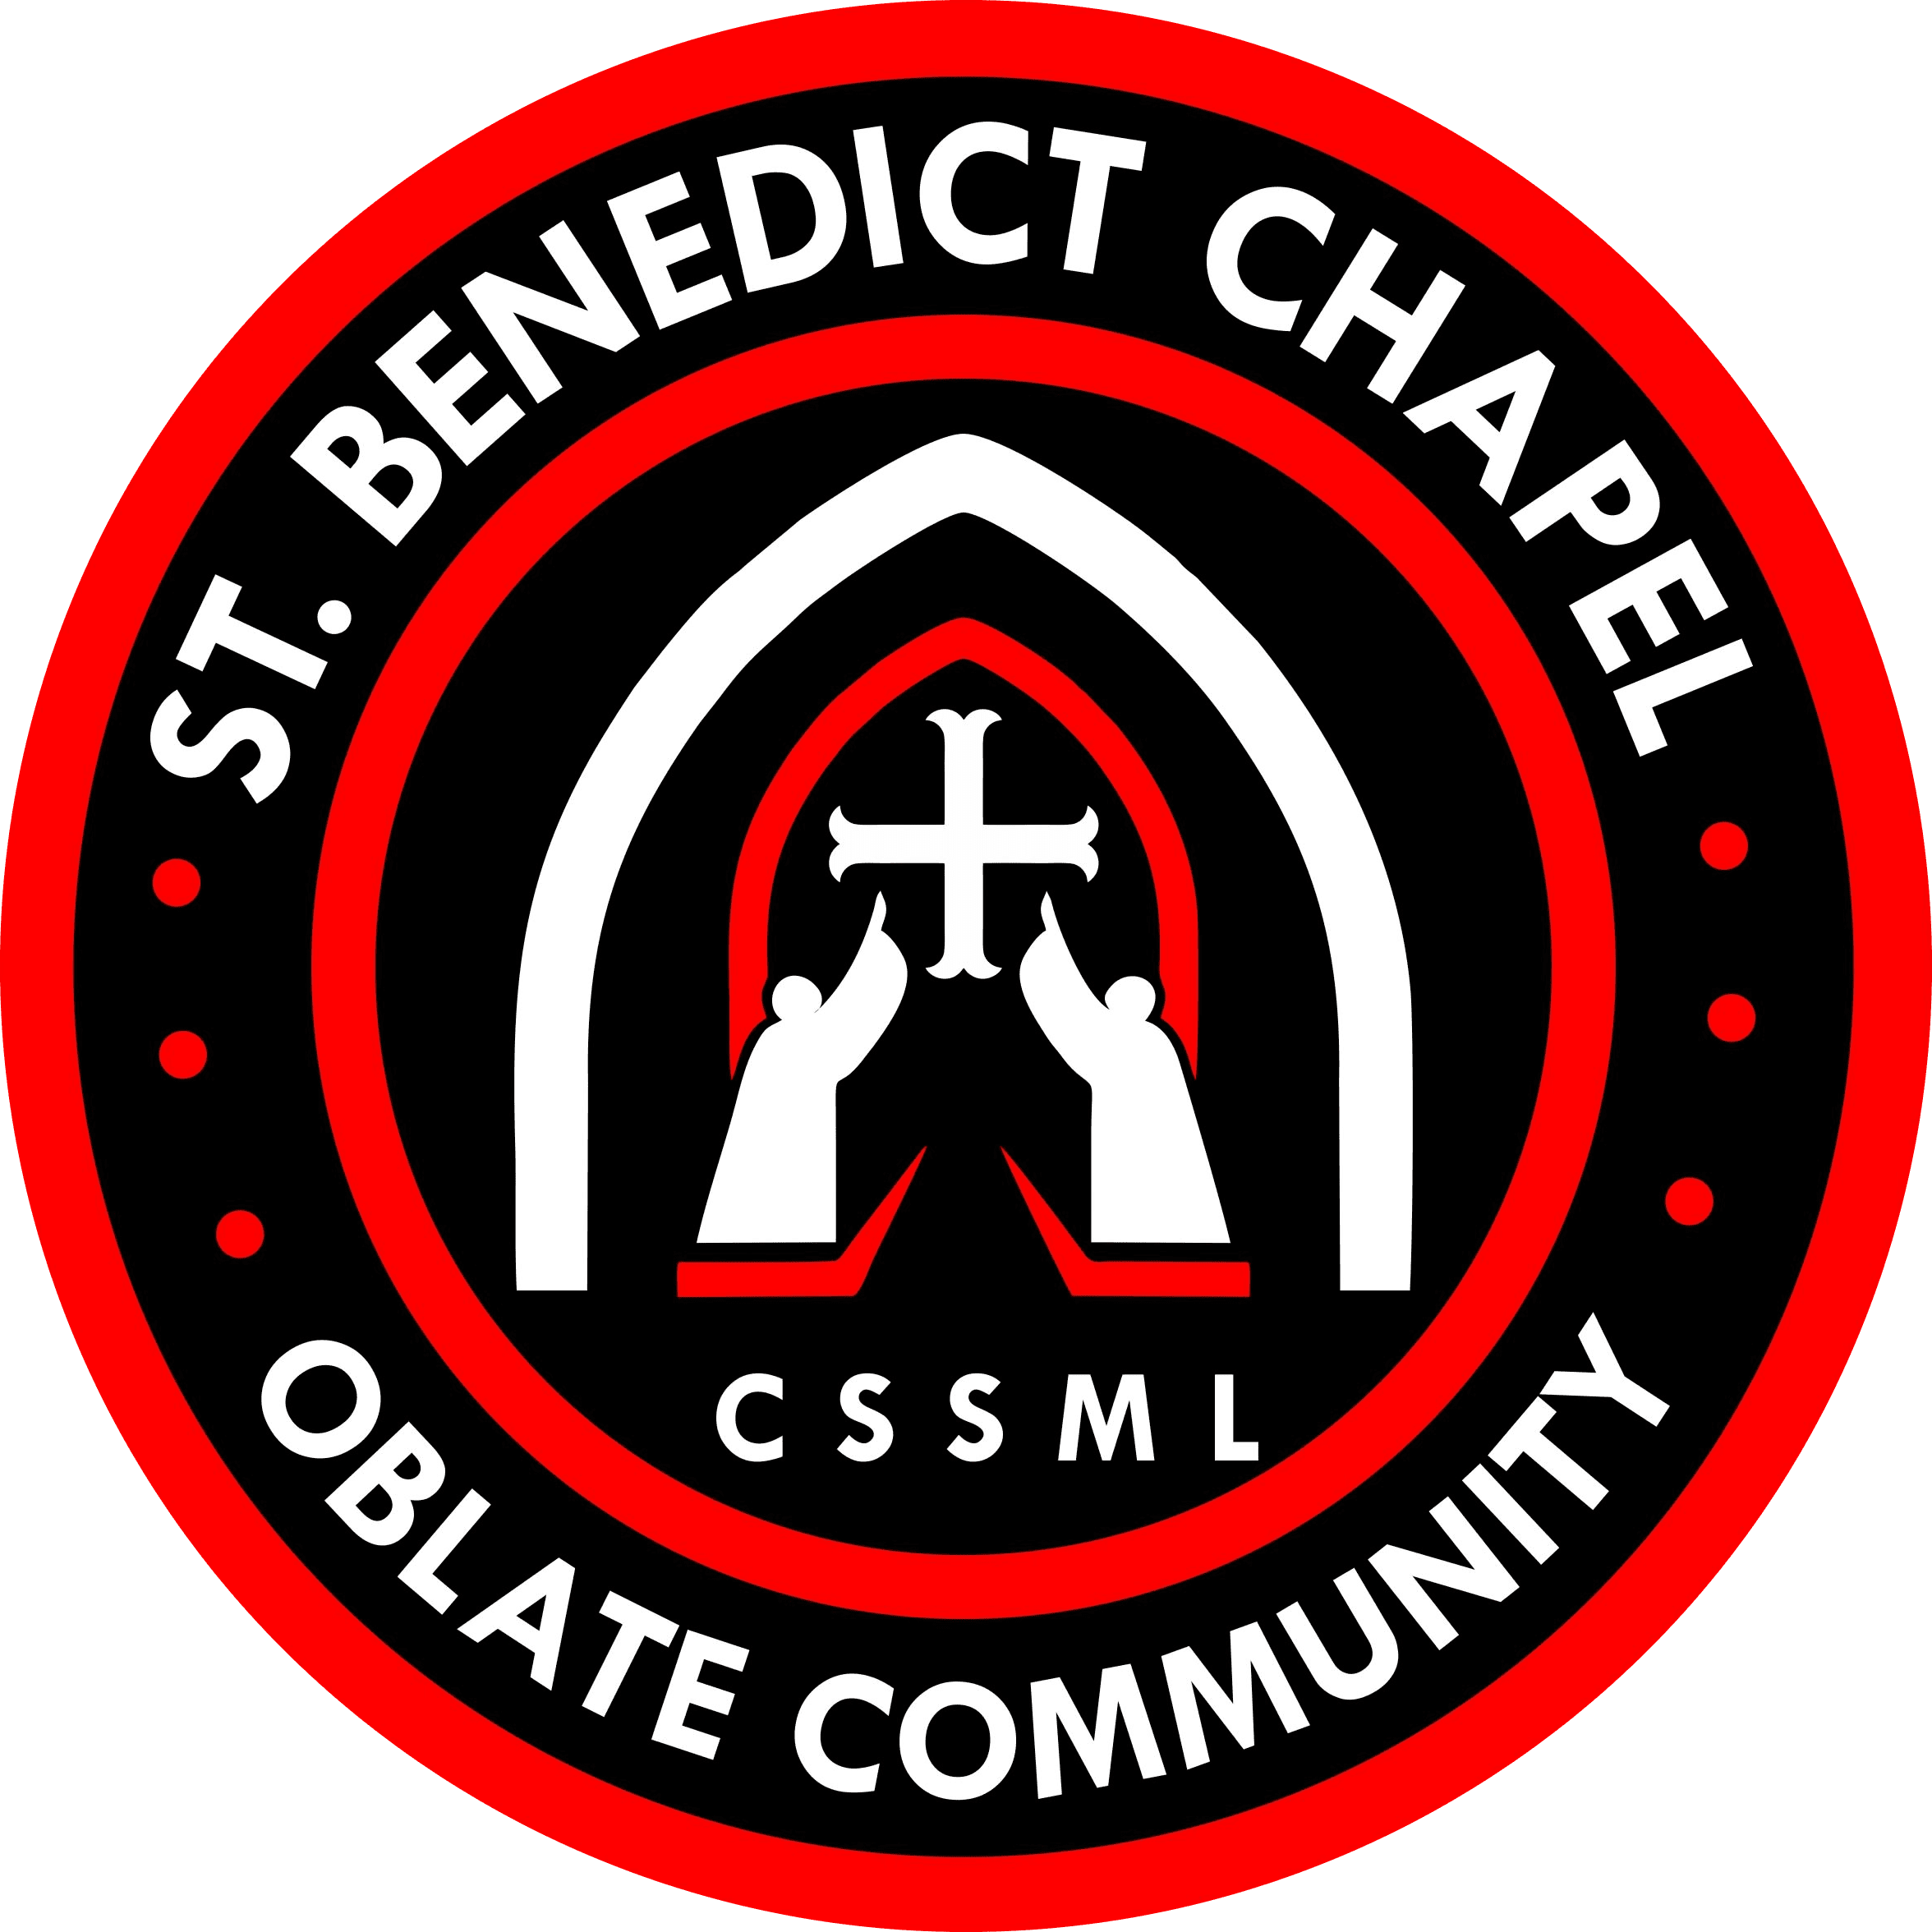 St. Benedict Chapel Oblate Community